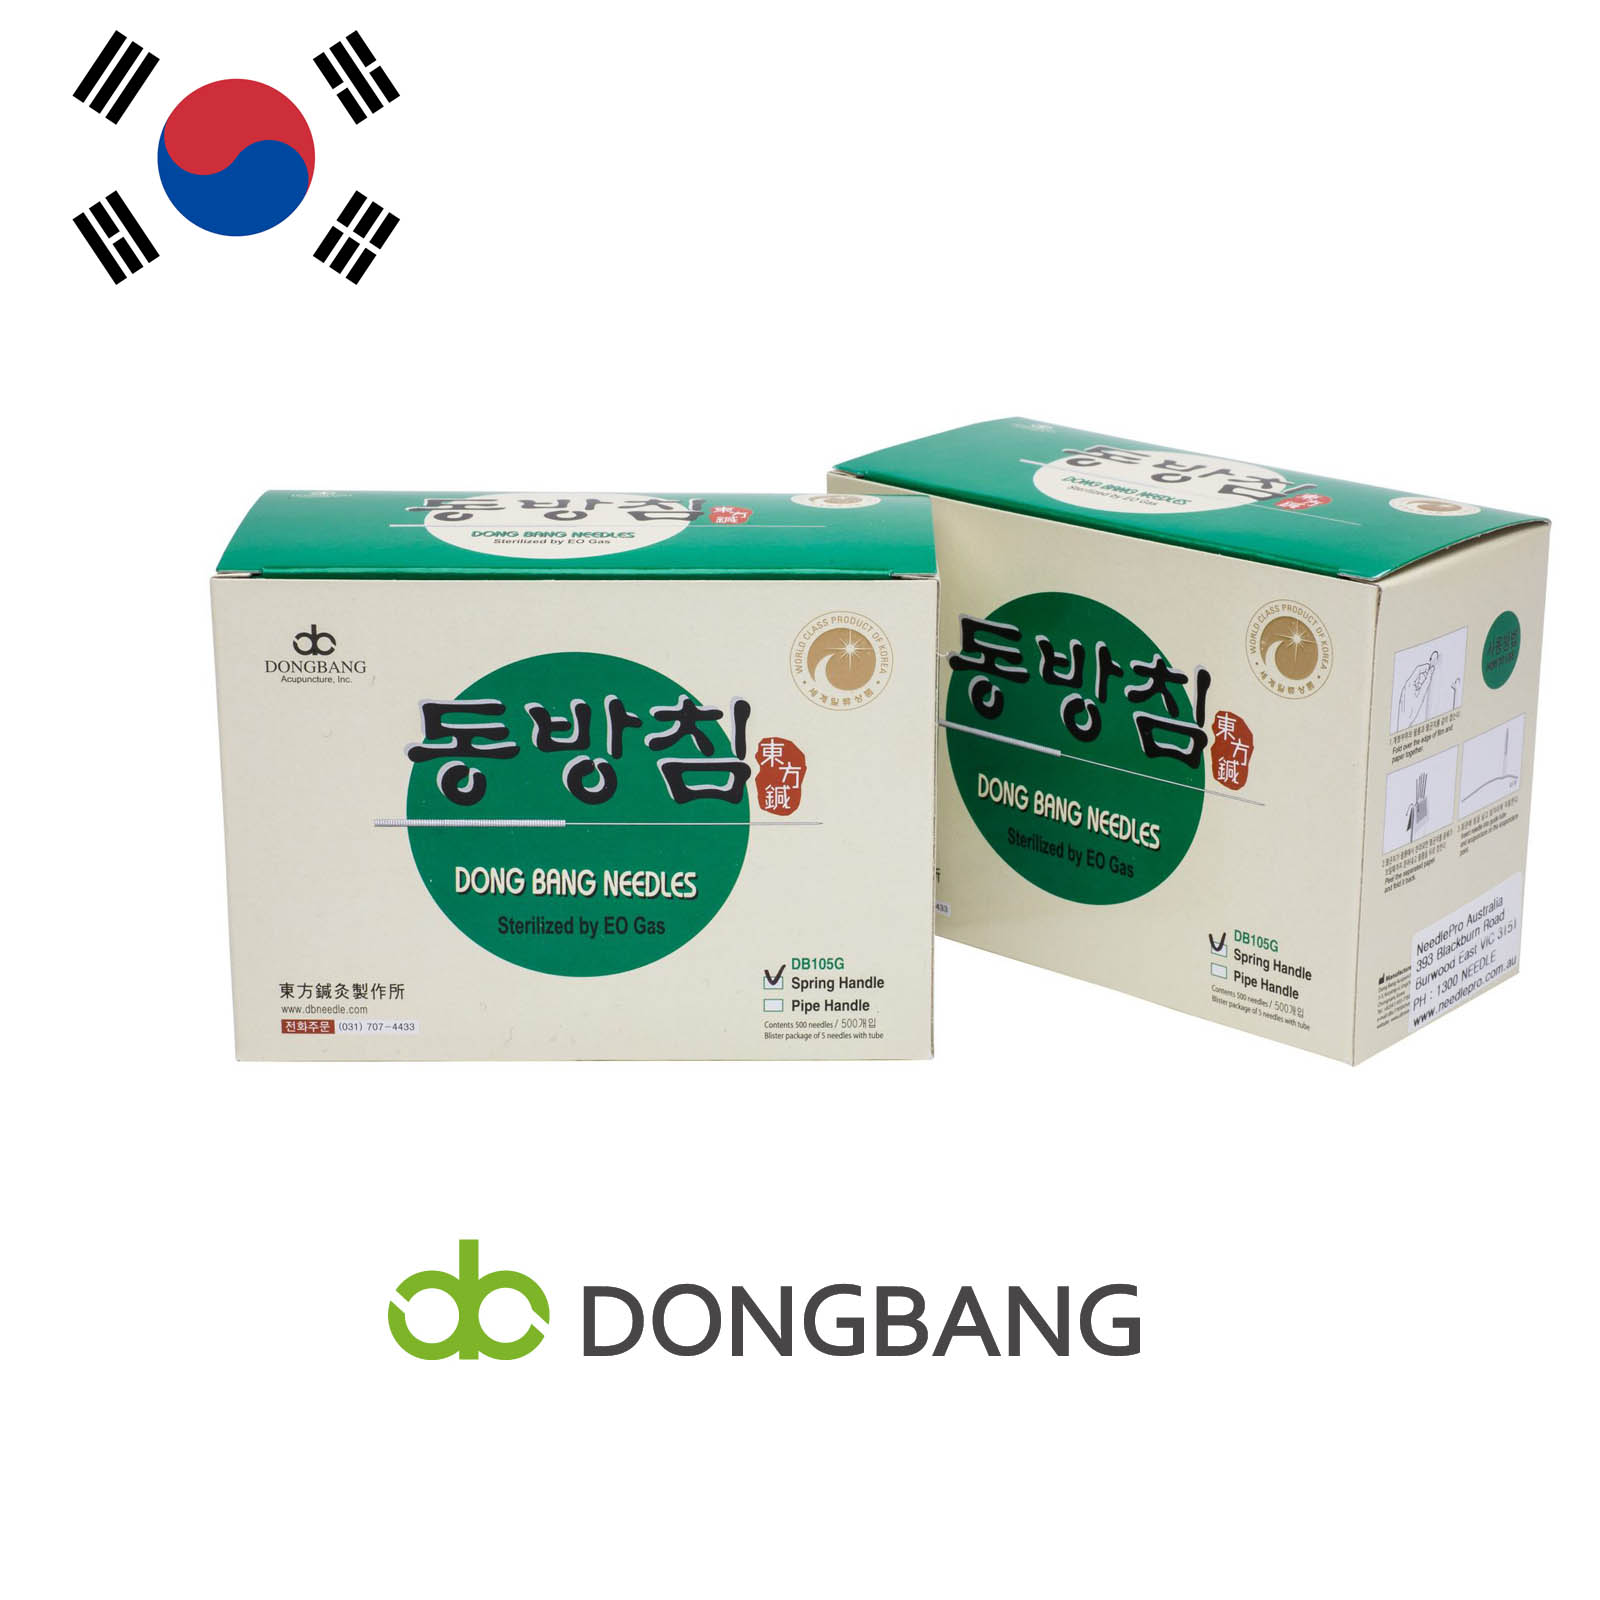 ACUPUNCTURE NEEDLES DONGBANG 500PCS  025x30